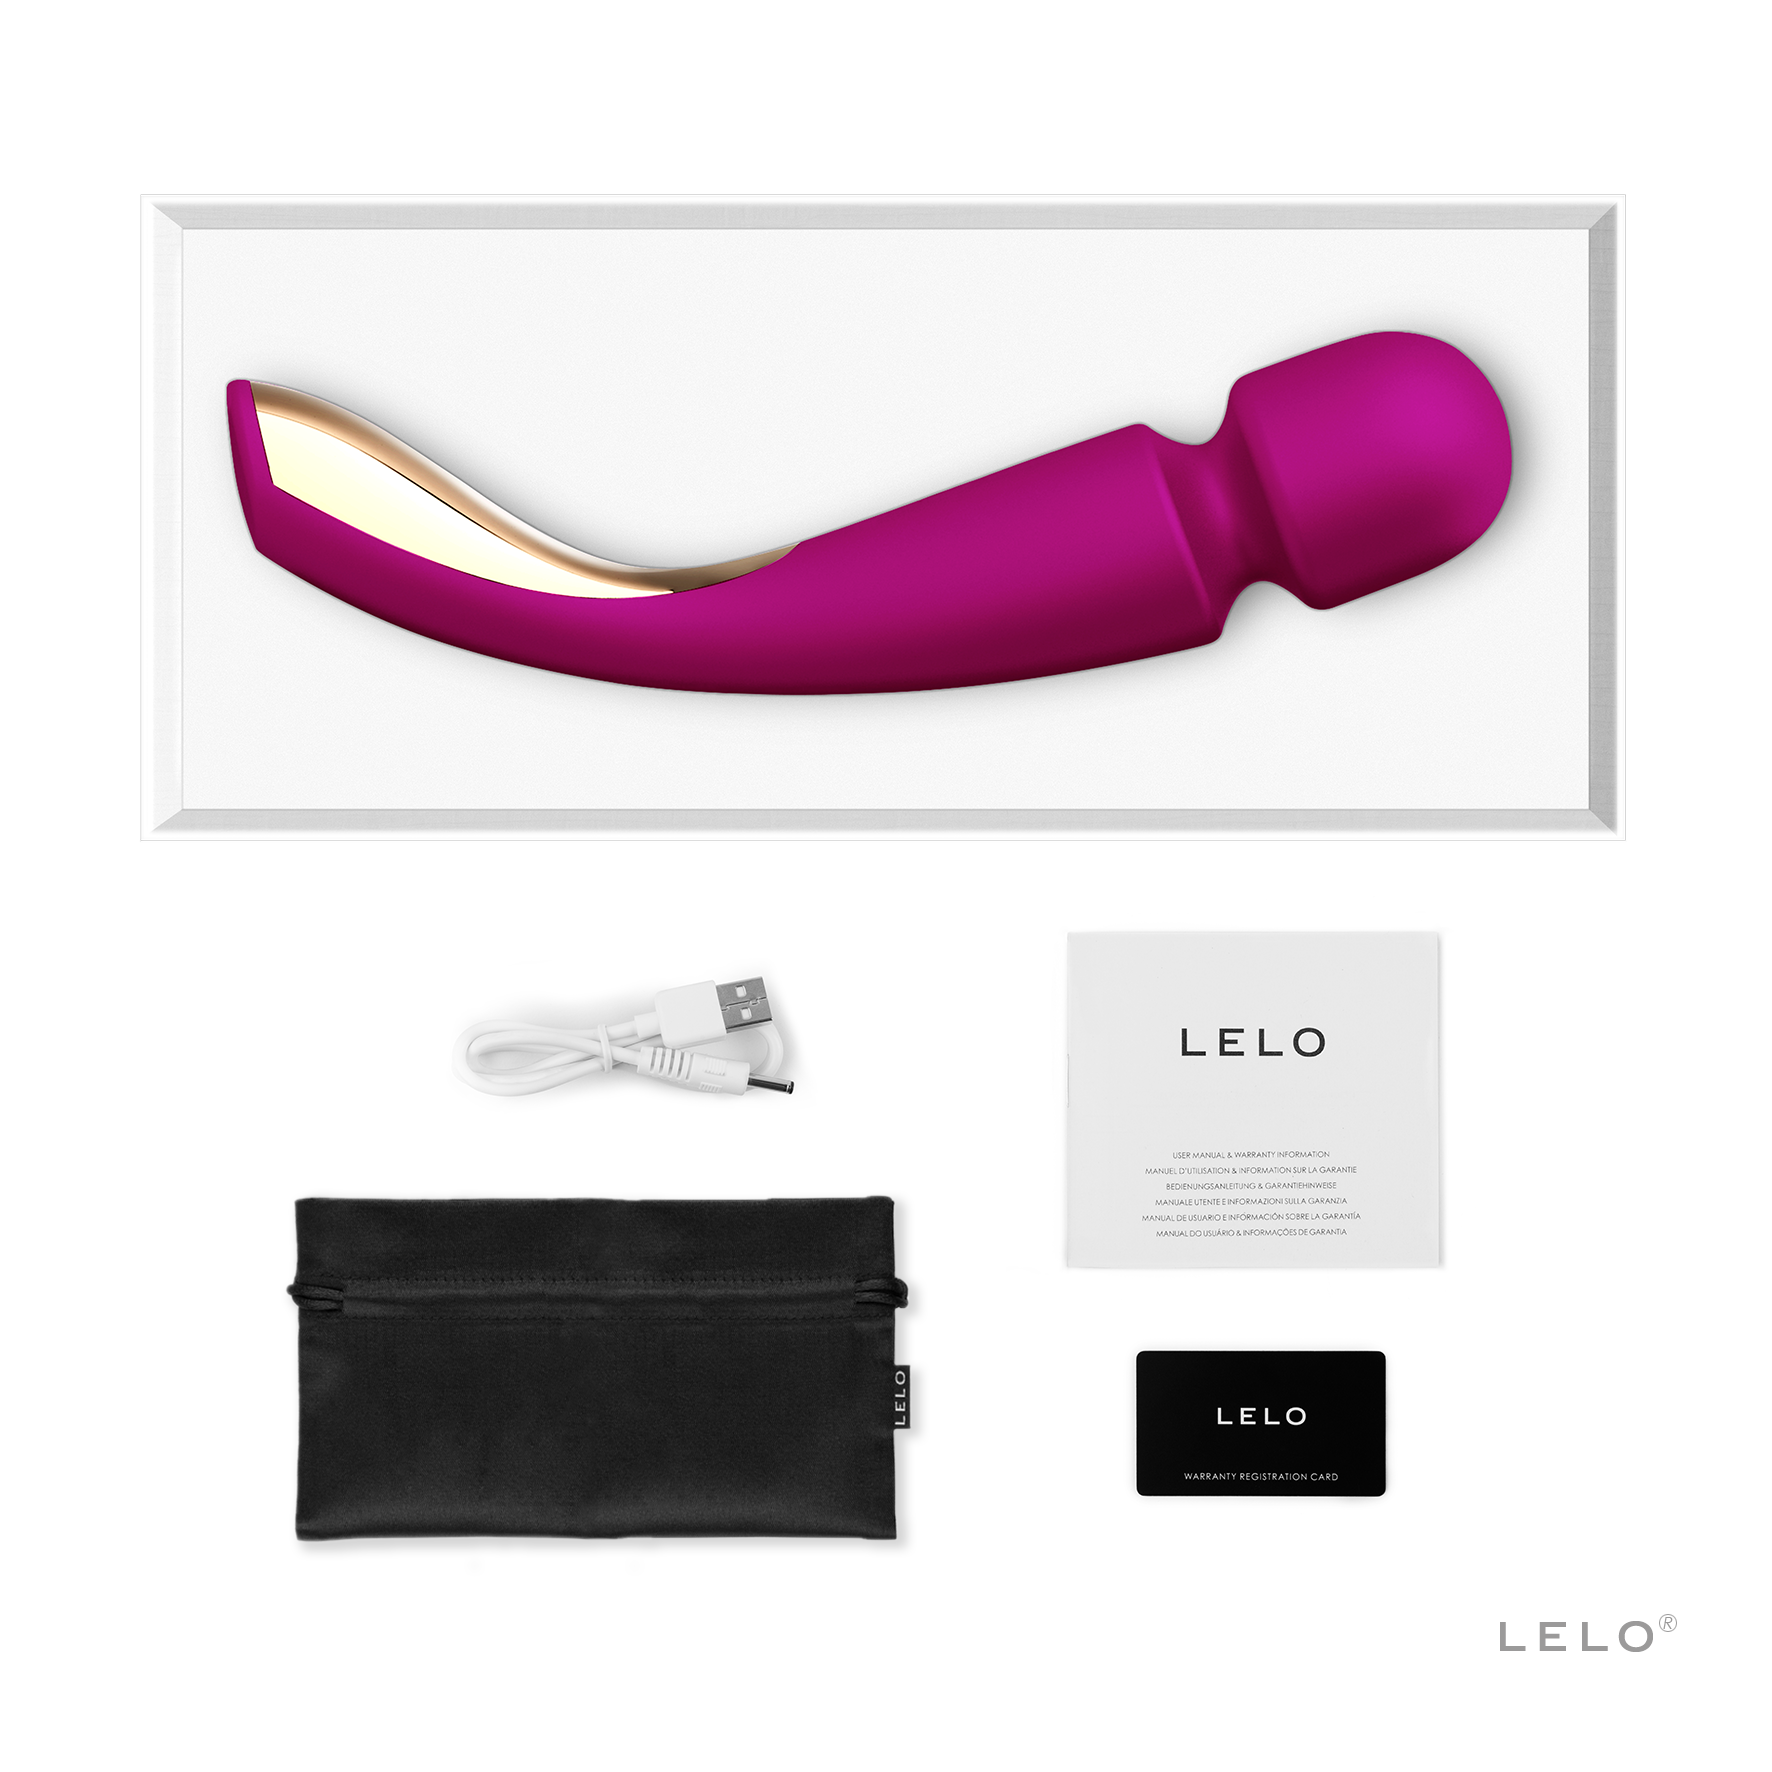 LELO Smart wand 2 Deep Rose Color-Large wand massager shown in a open-box presentation